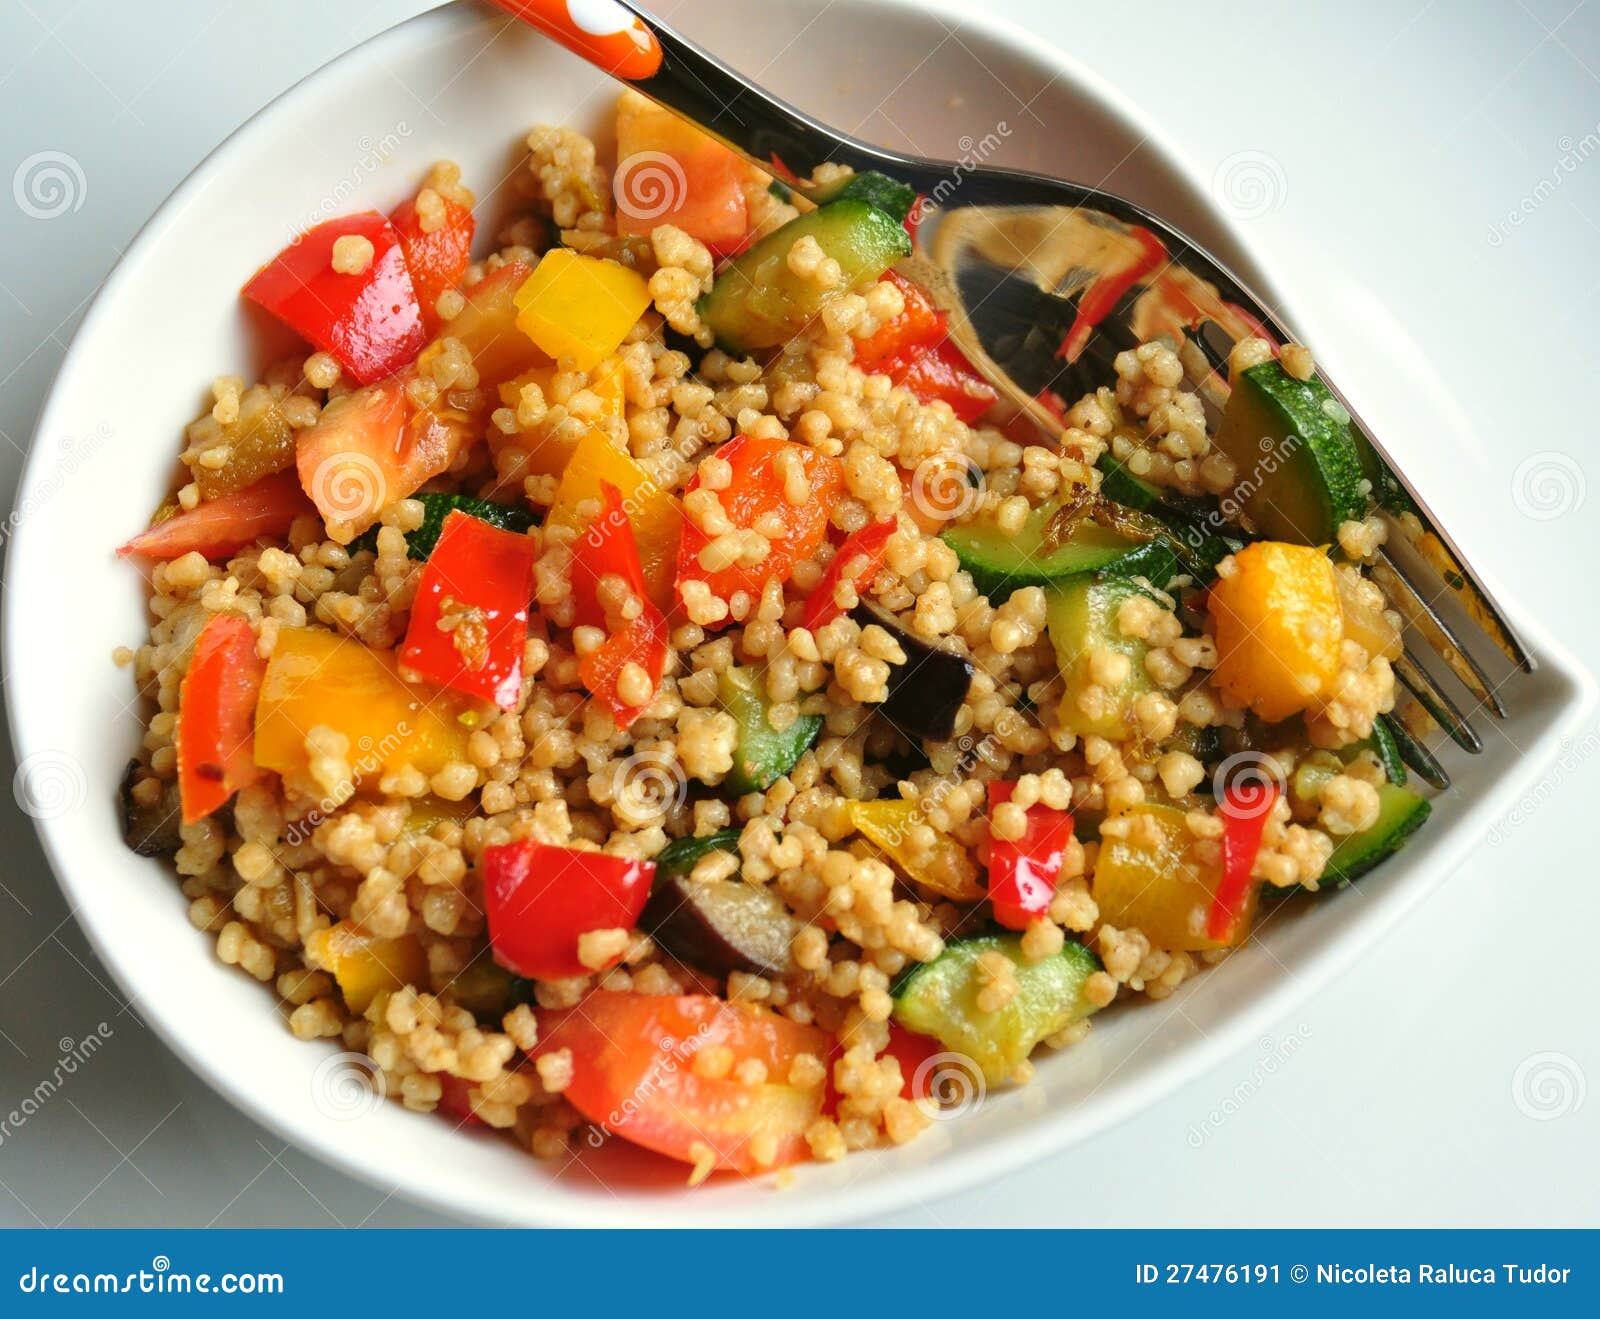 vegetable cous cous meal